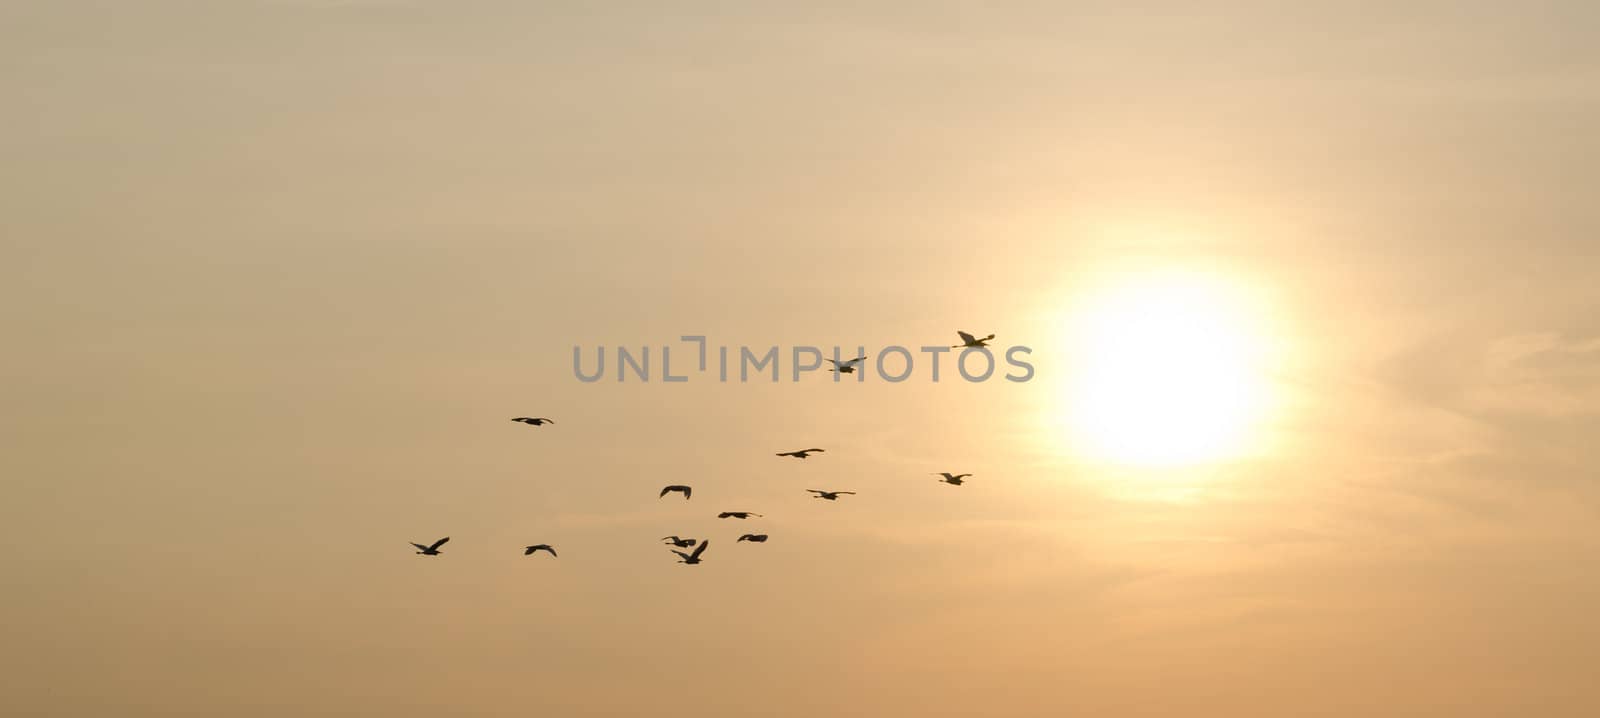 sunset and birds in the sky by hinnamsaisuy